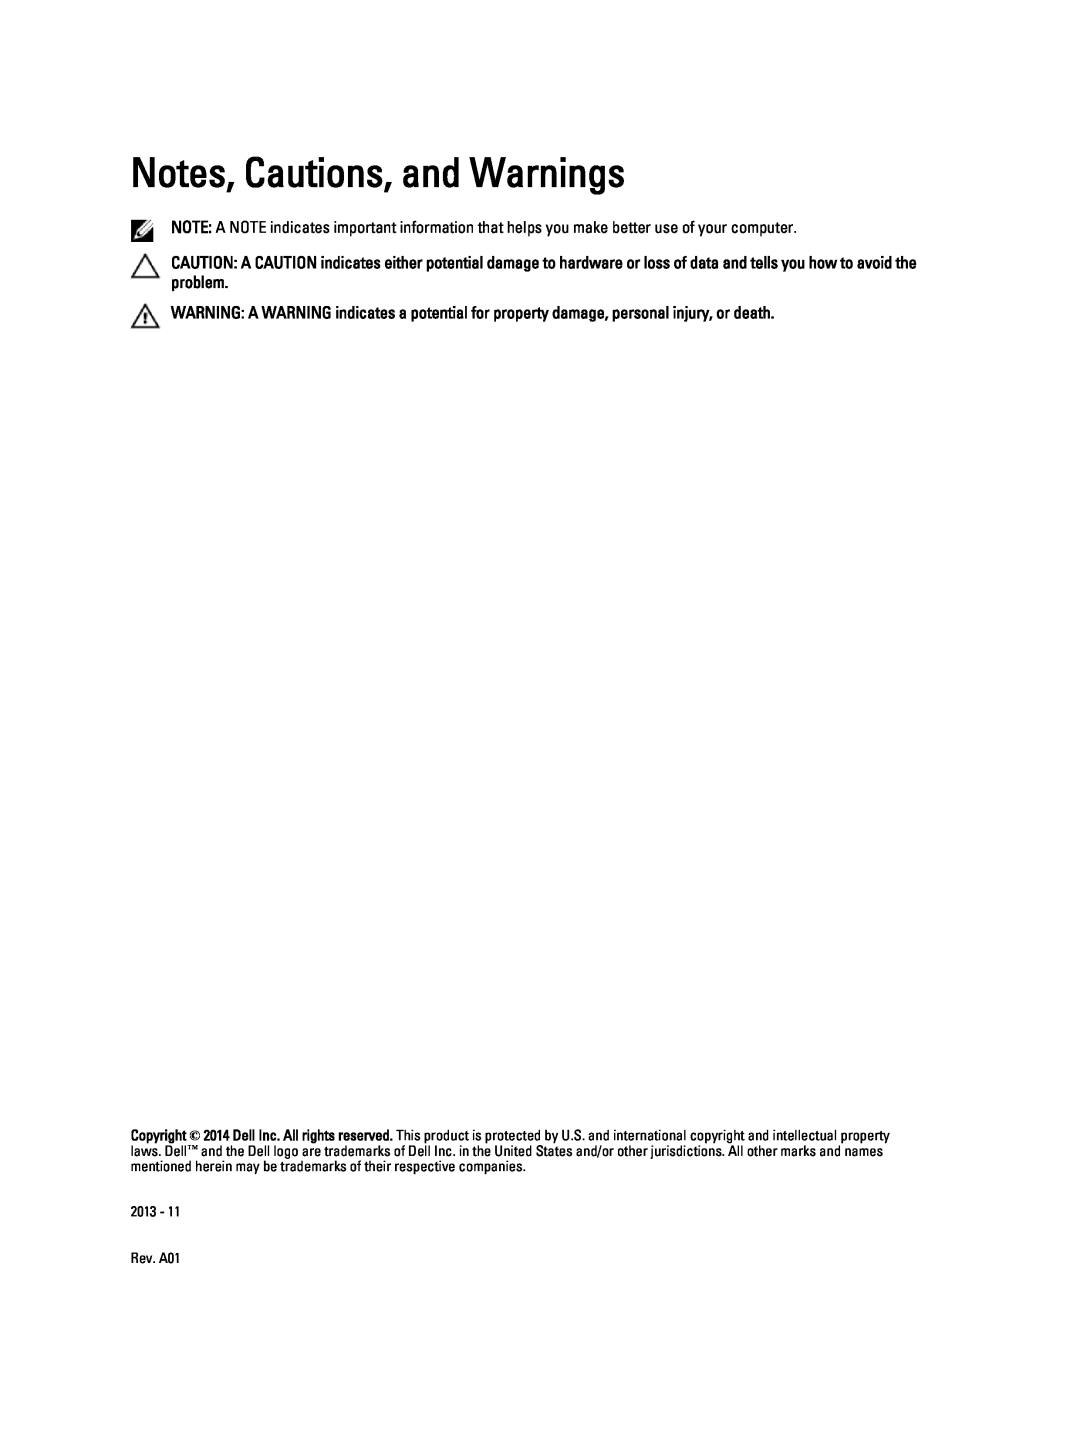 Dell W04C owner manual Notes, Cautions, and Warnings 